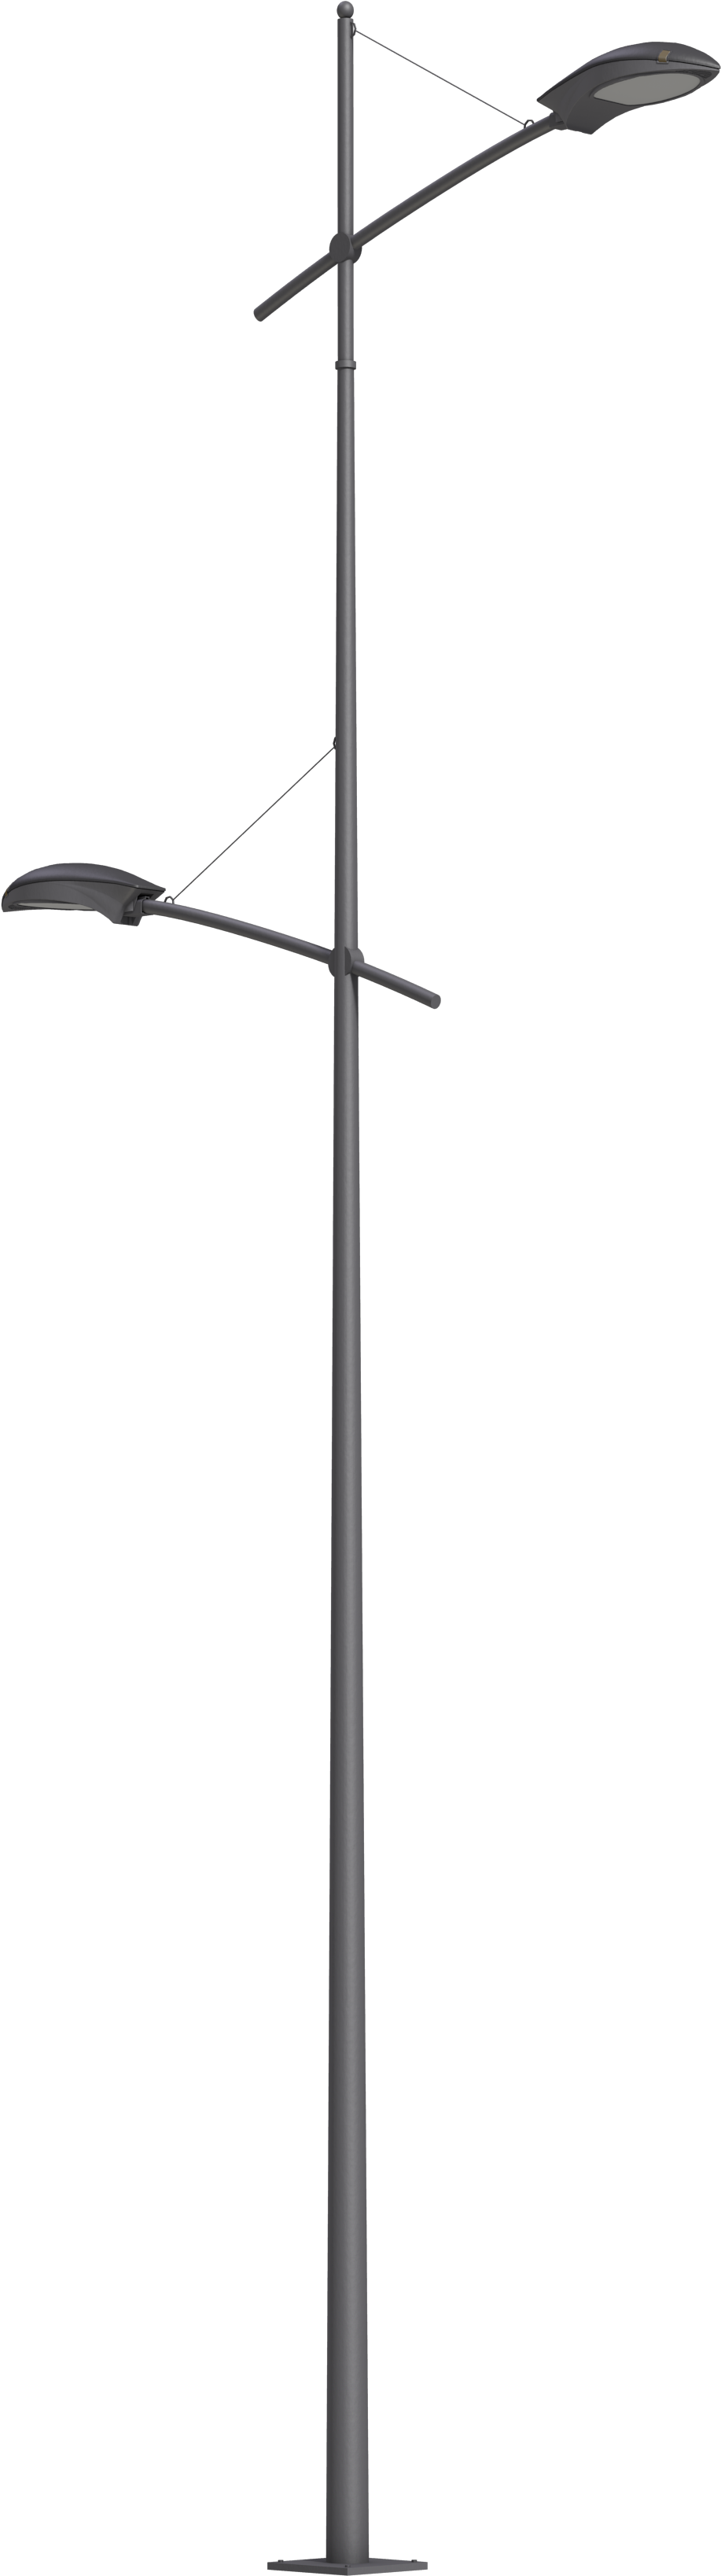 Modern Double Arm Street Lamp PNG image